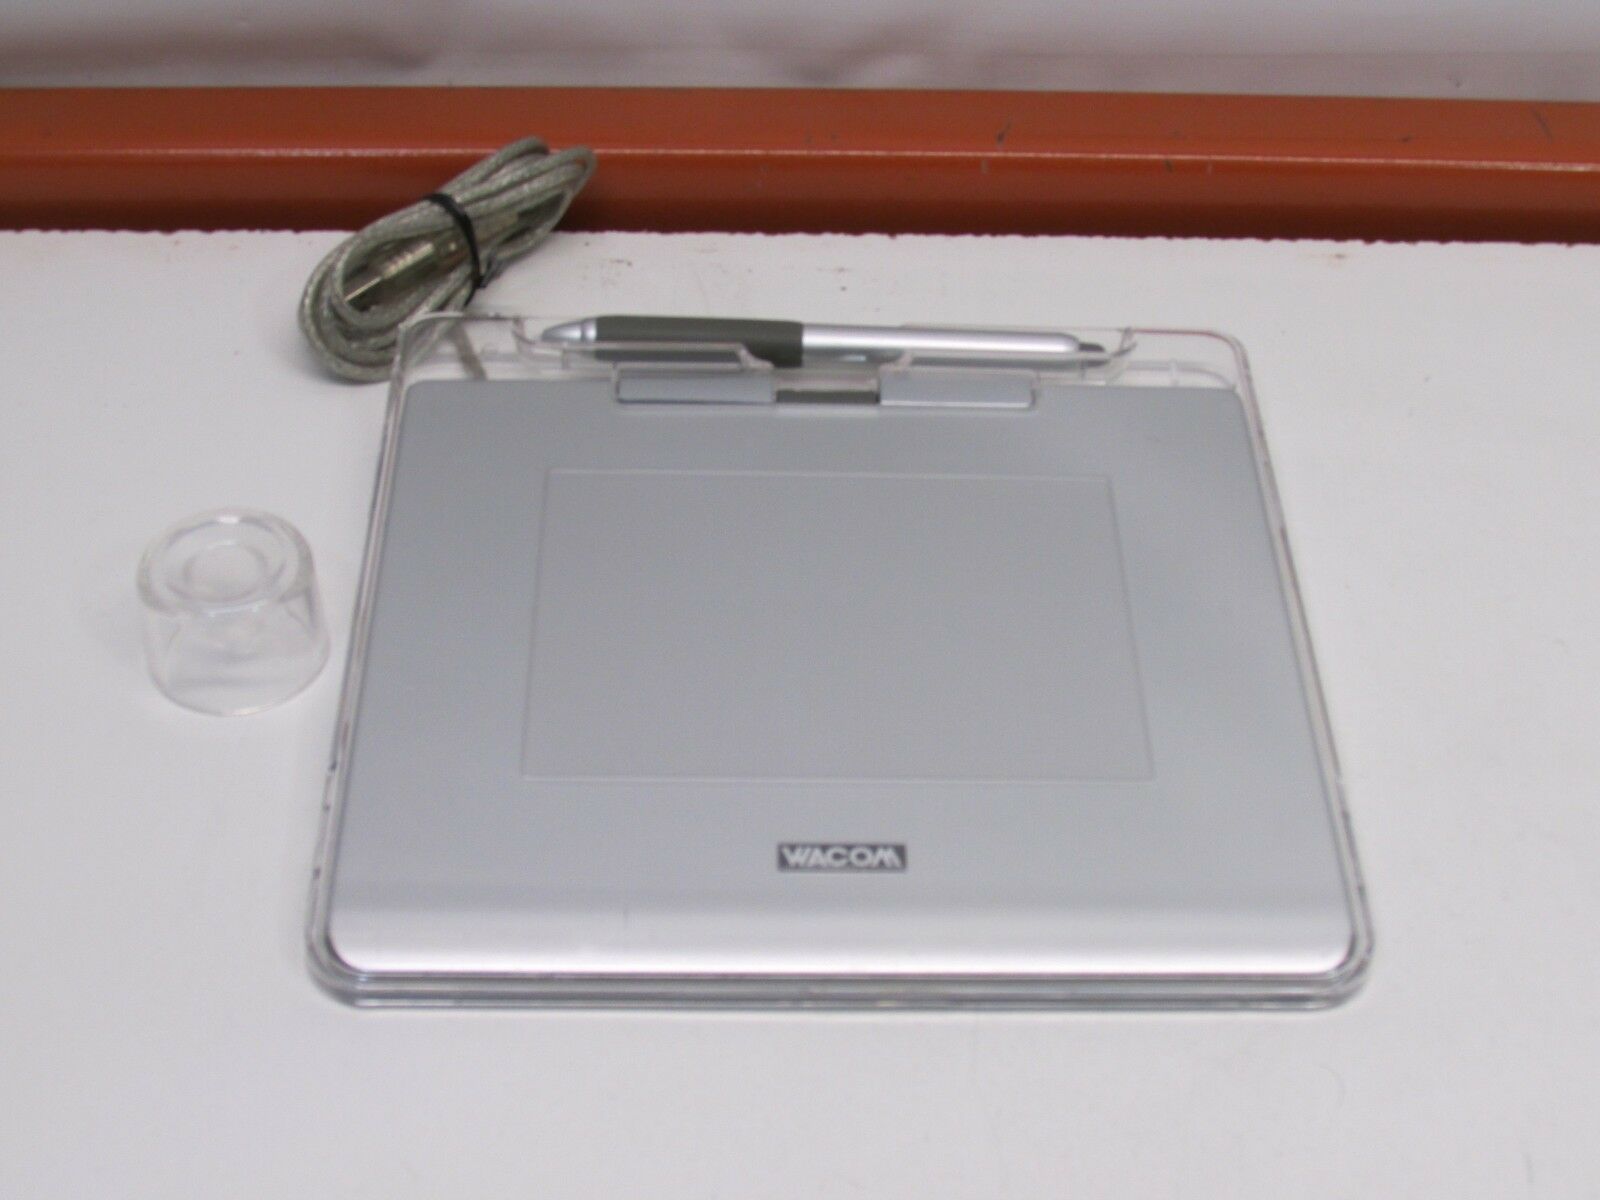 Wacom Drawing Tablet Model CTE-440 With Pen Silver